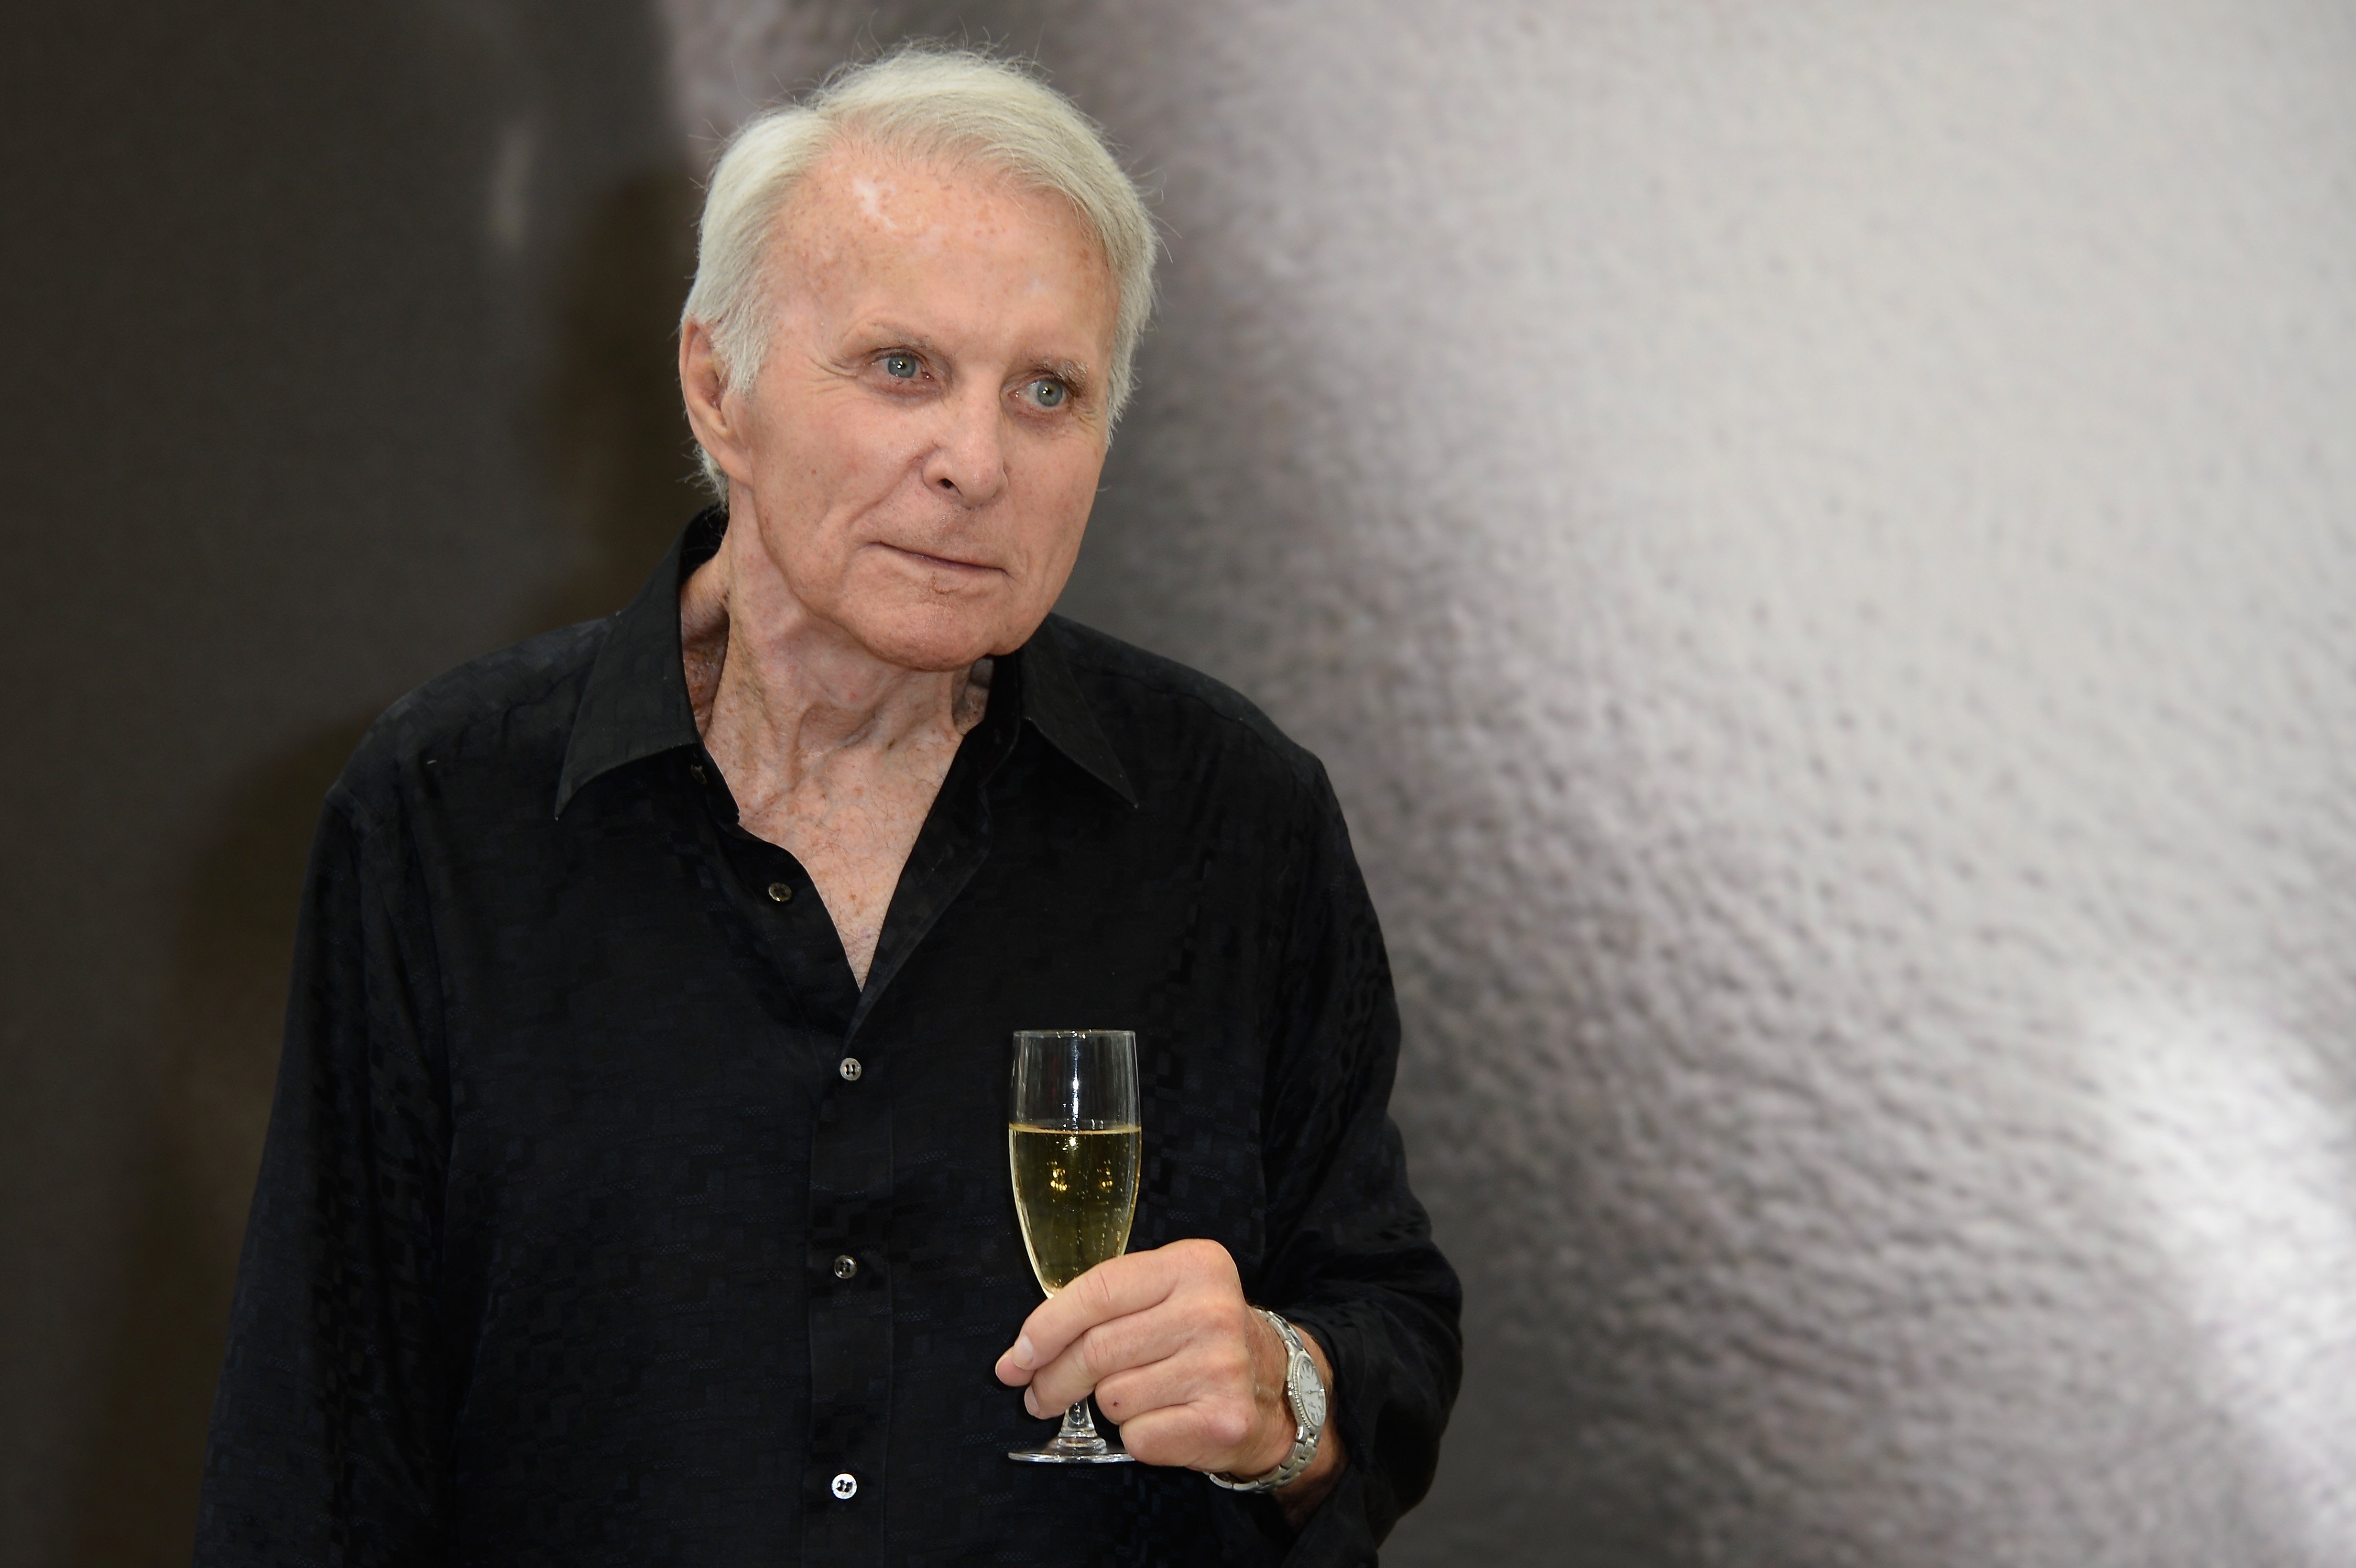 Robert Conrad poses at a photocall during the 53rd Monte Carlo TV Festival on June 12, 2013 in Monte-Carlo, Monaco. | Source: Getty Images